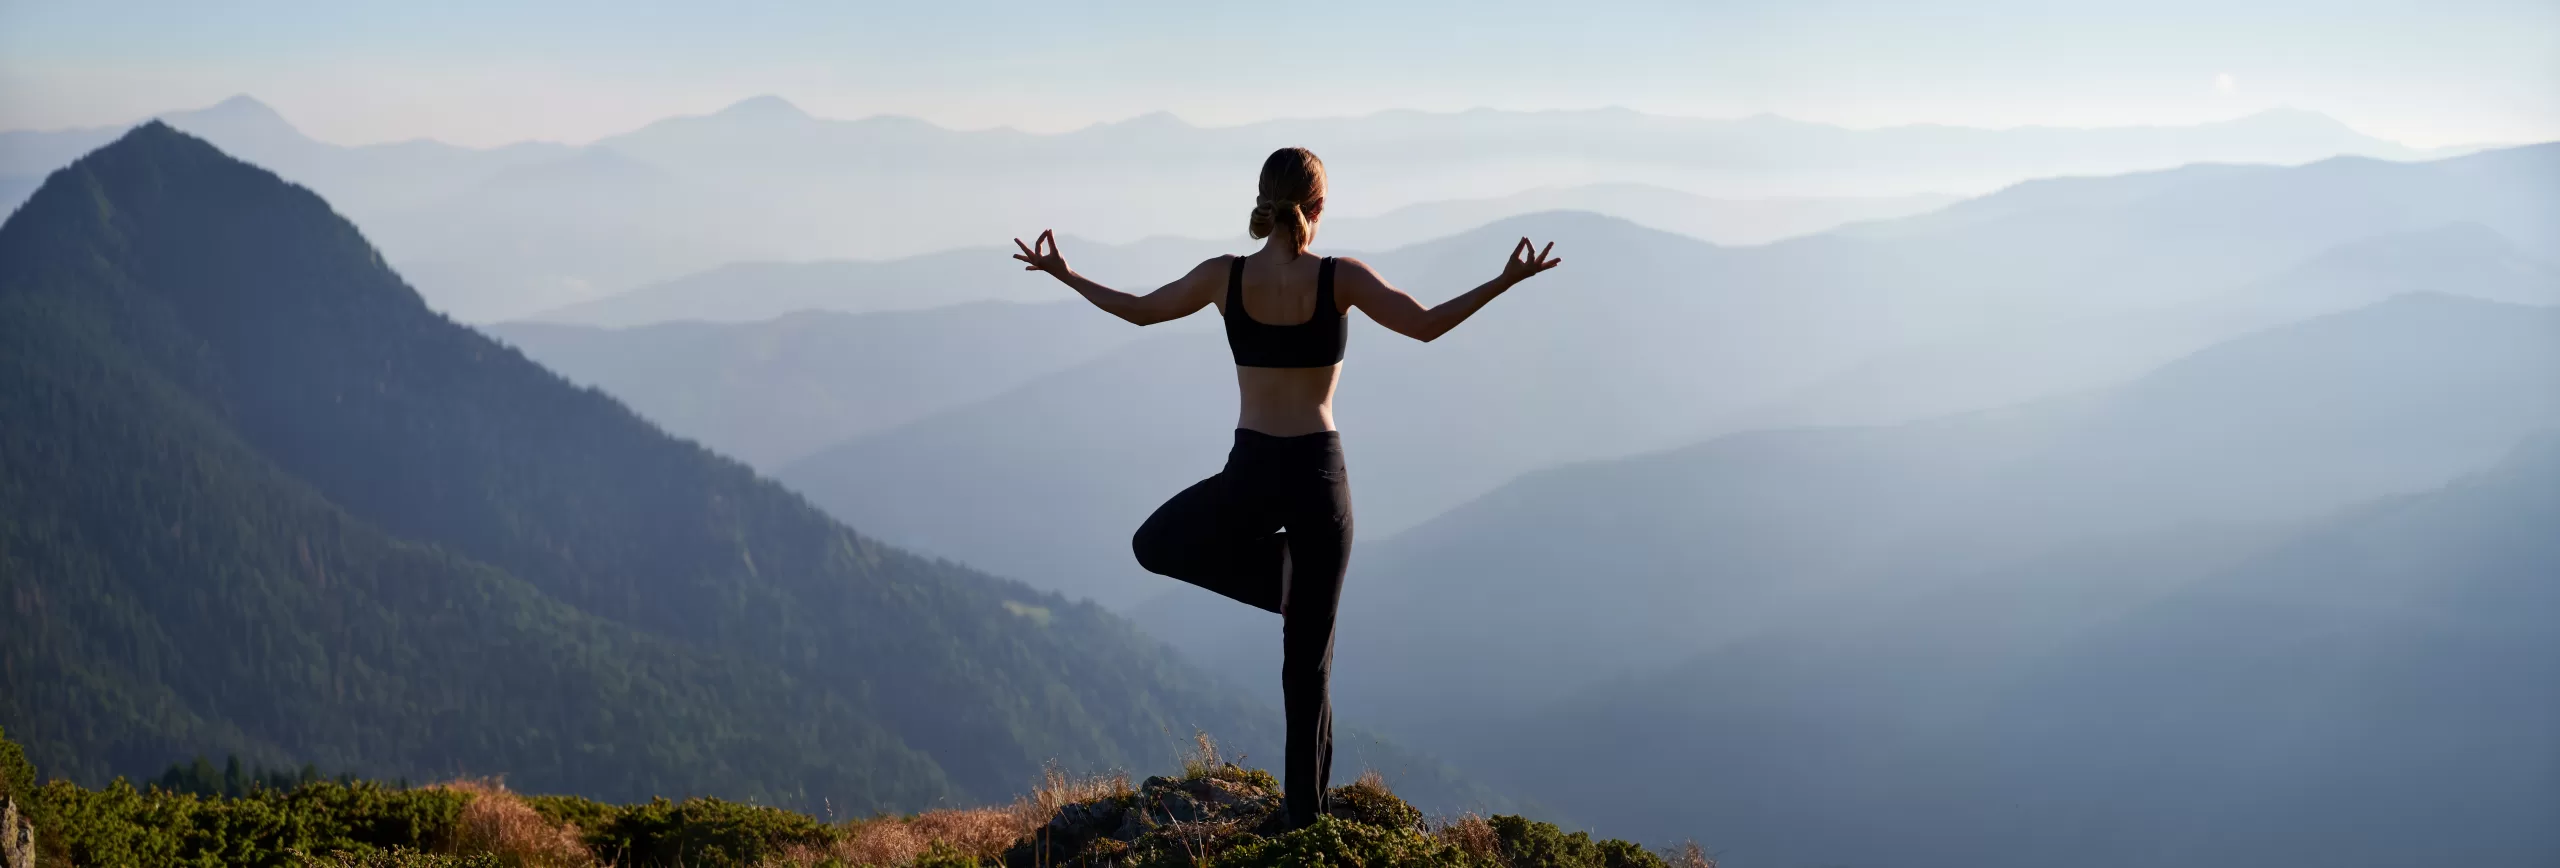 How To Embrace Empowering Yoga Quotes In 3 Minutes - Wellness Travel Diaries